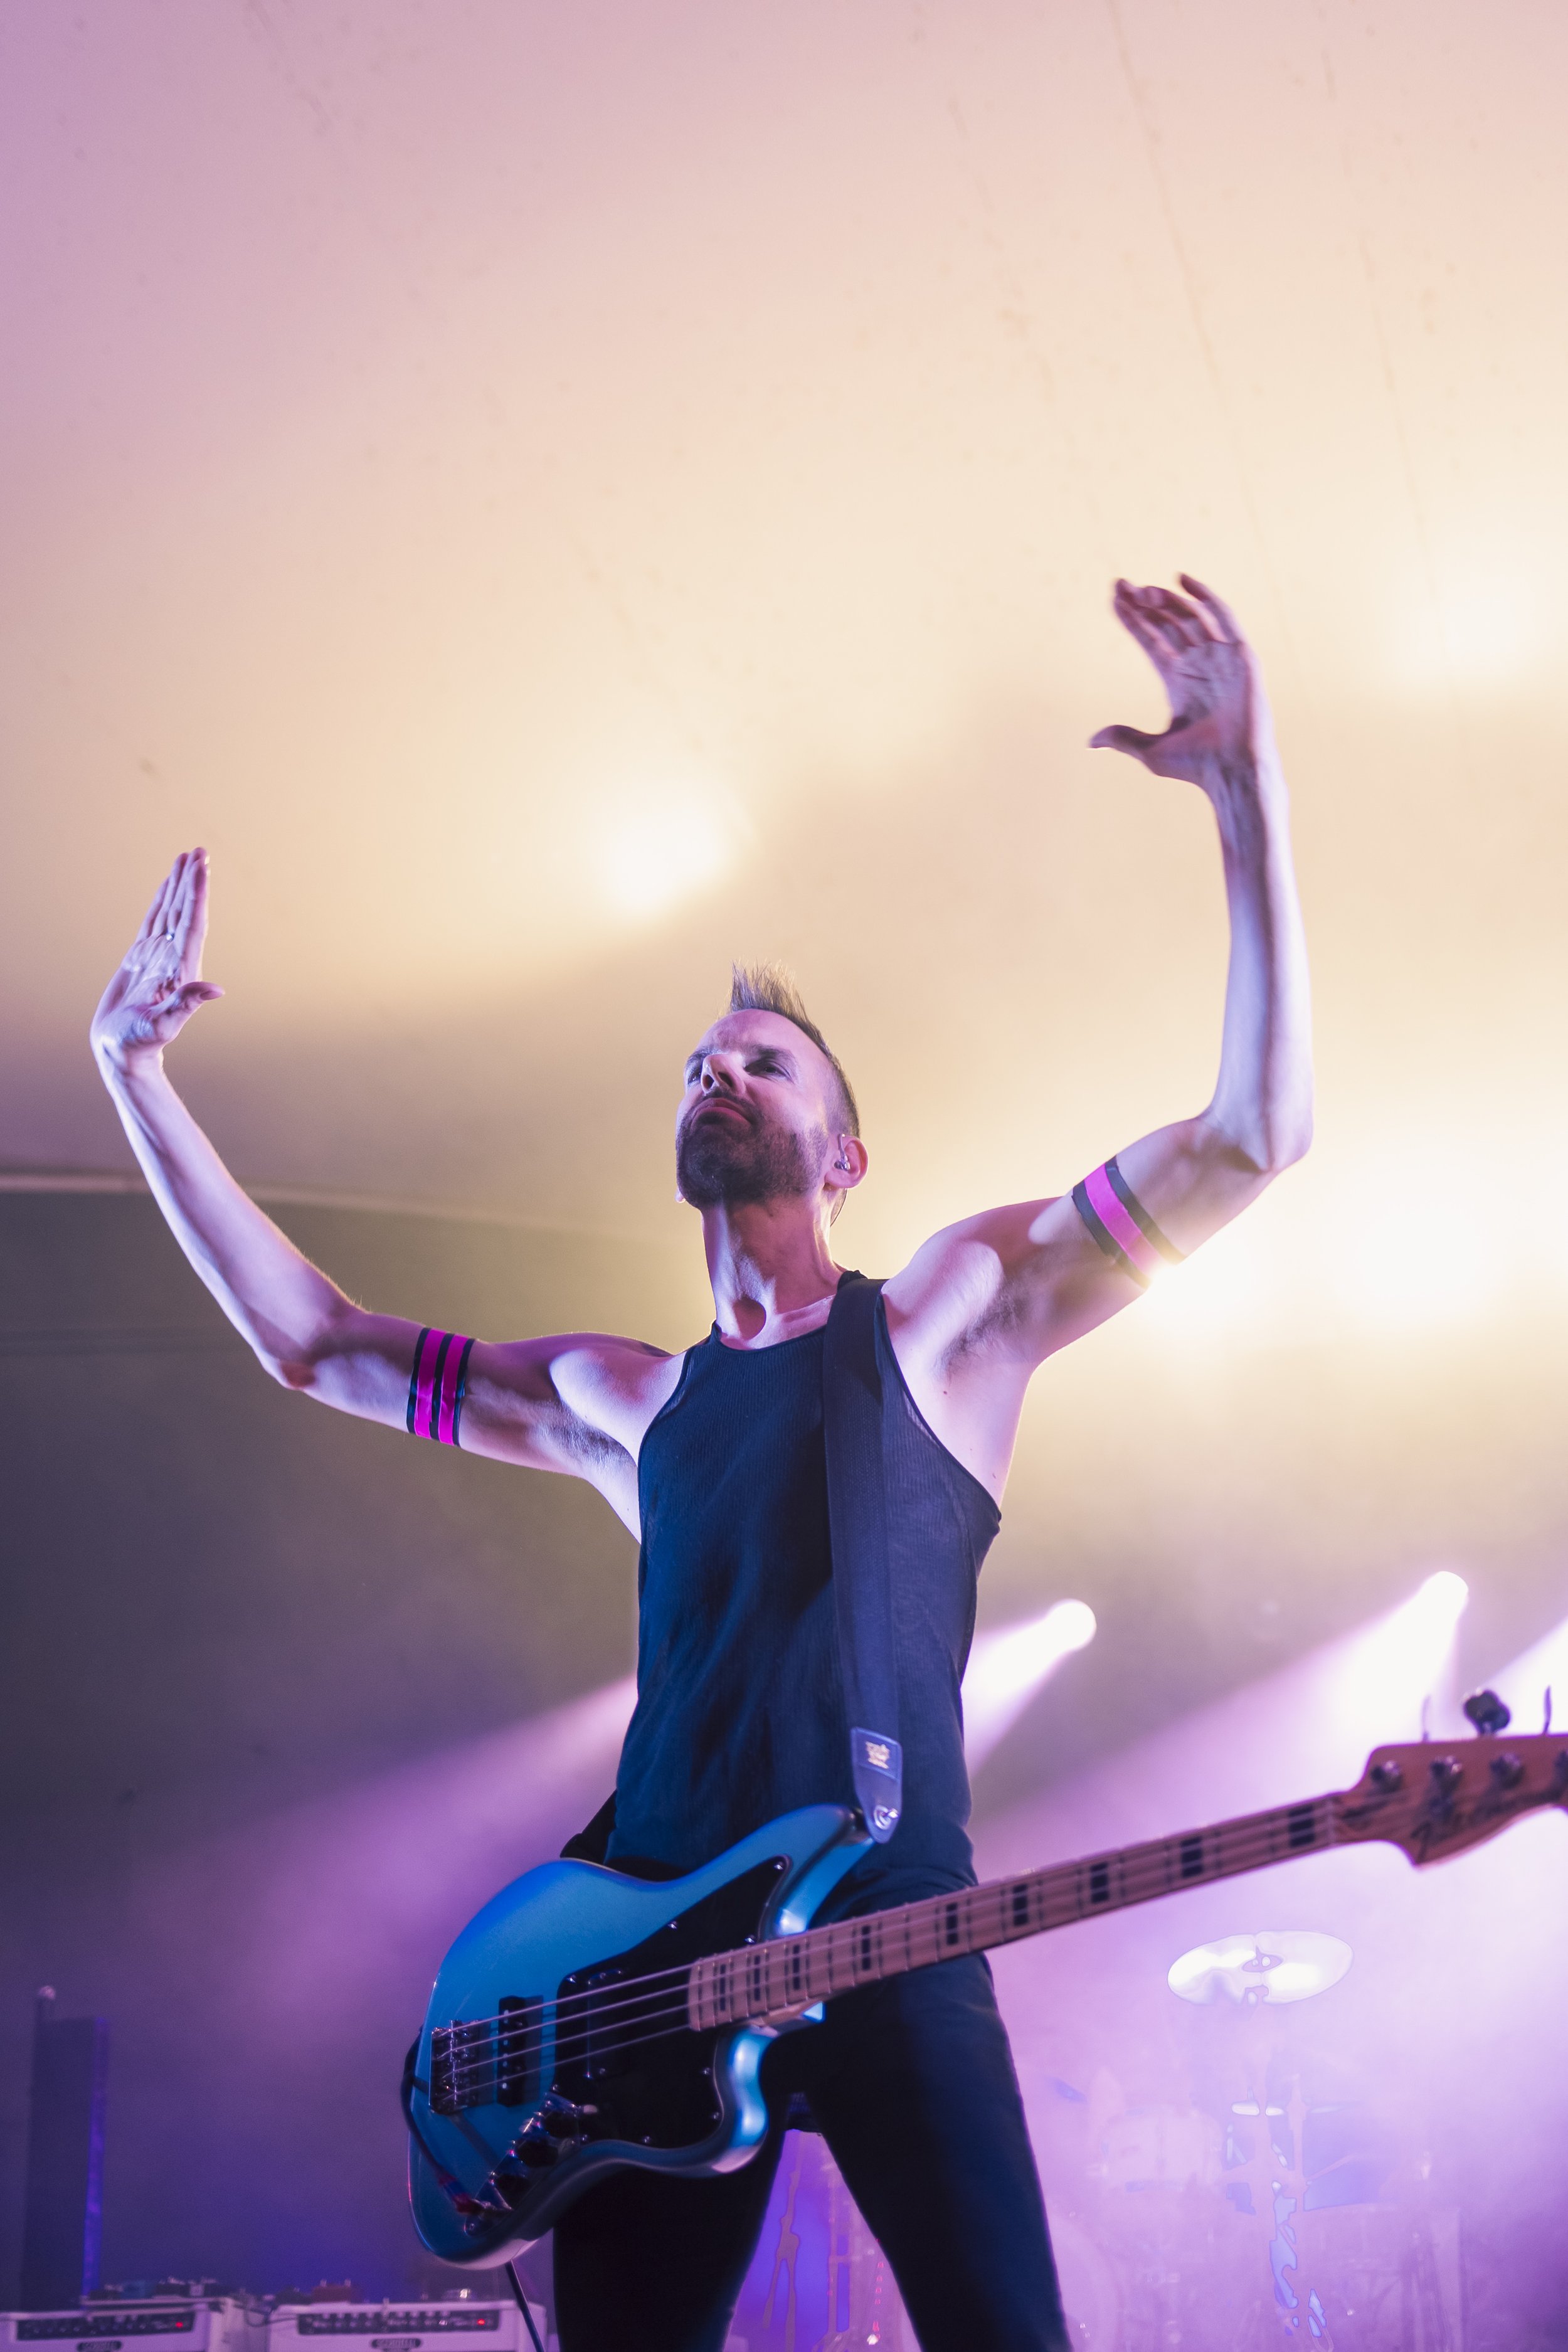  Stephan Olsdal, guitarist and bassist for Placebo, supports Moloko and engages with the crowd. 